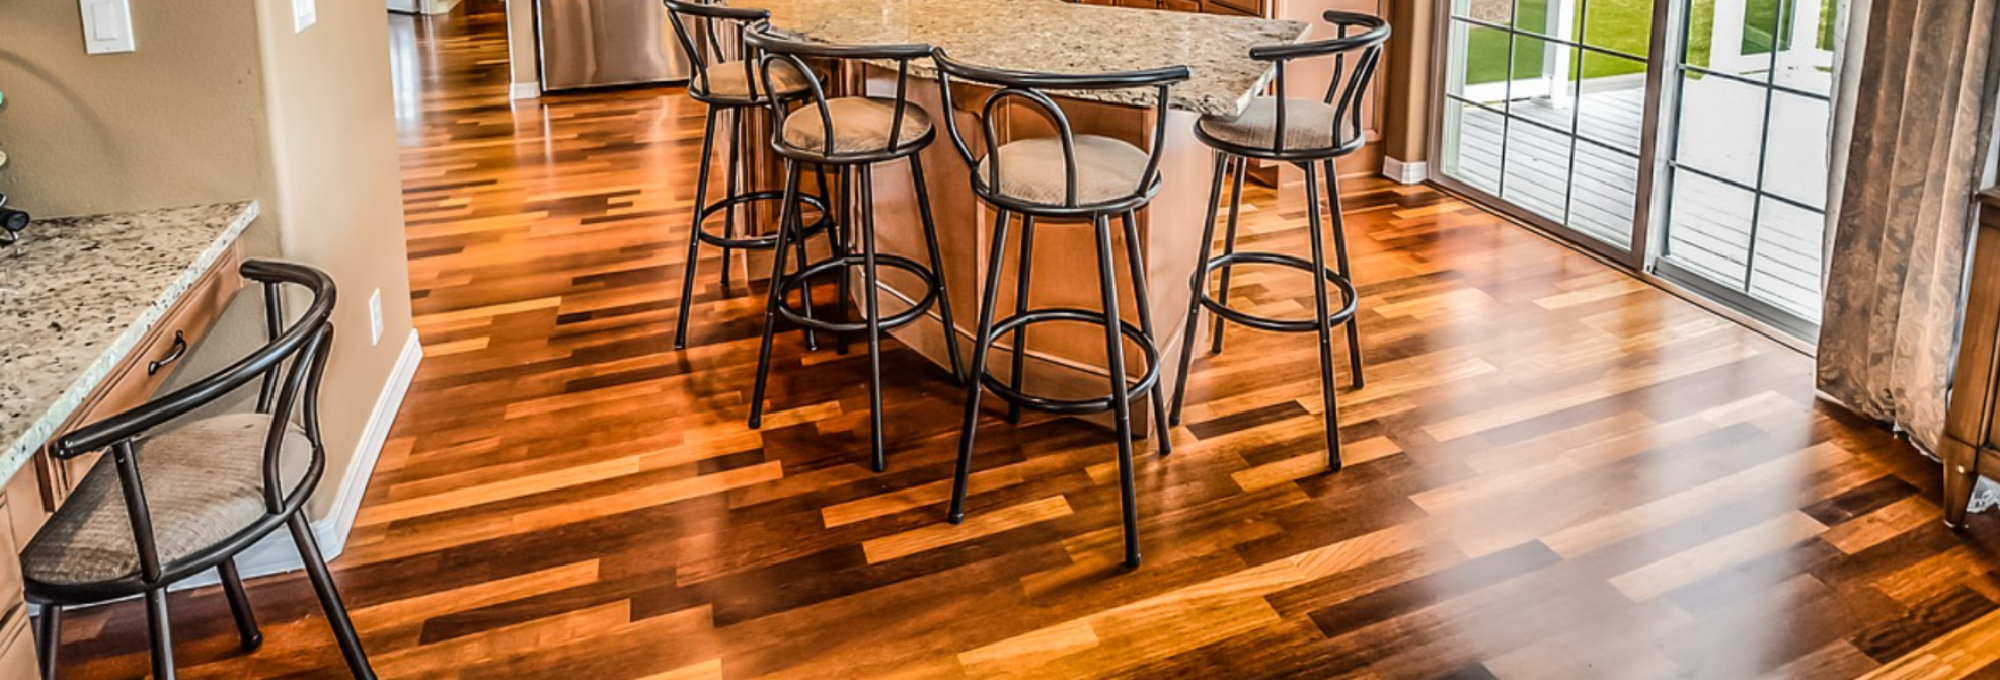 Shop Flooring Products from Powell Flooring in West Milford